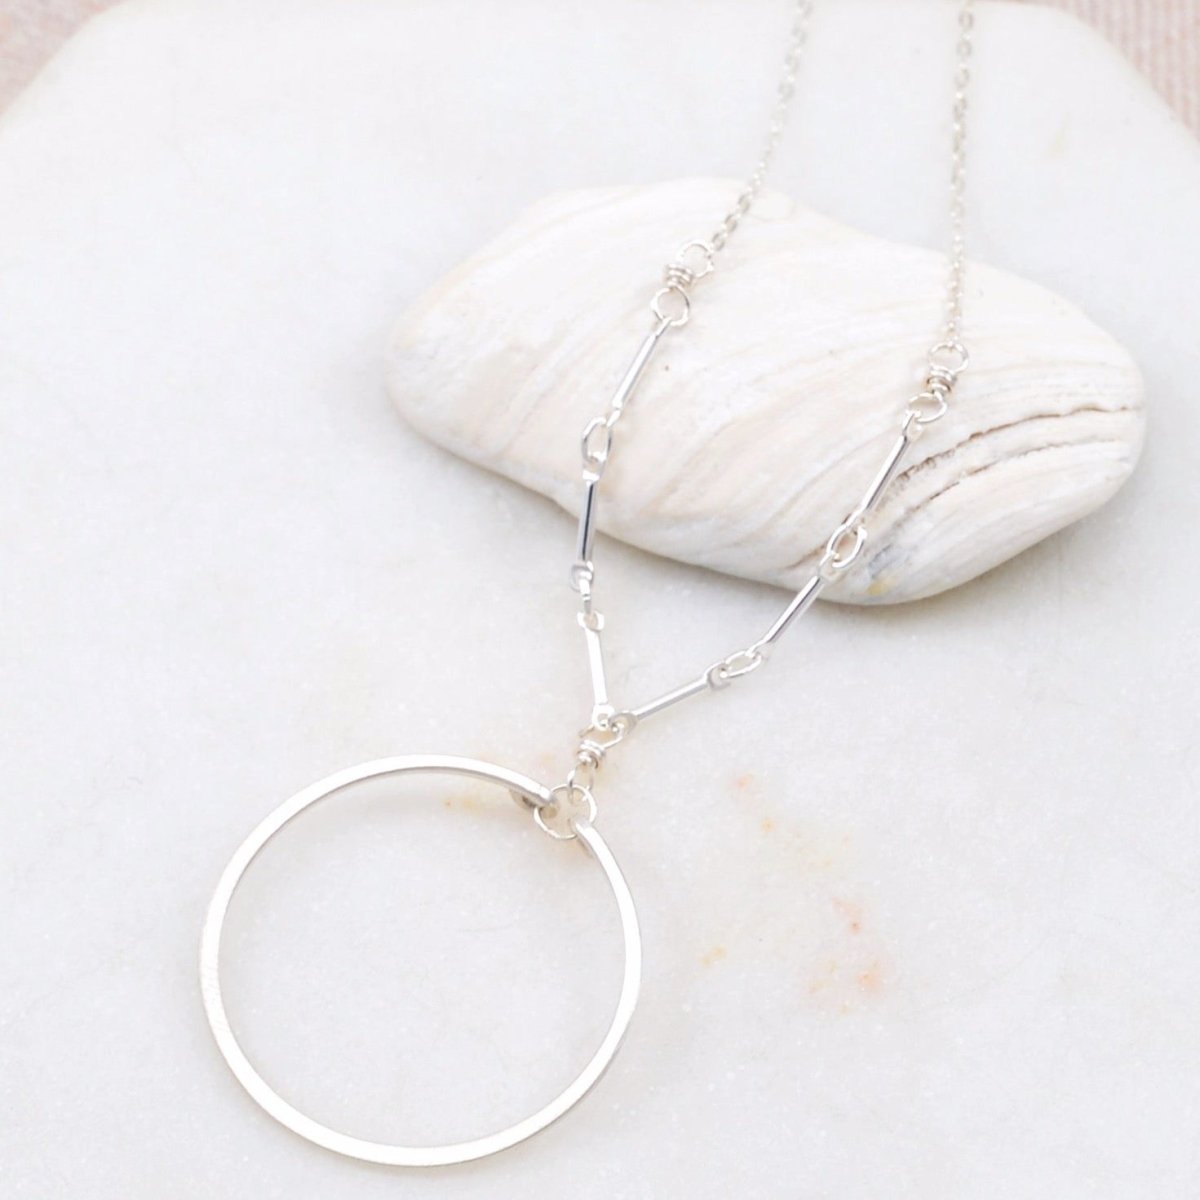 A single silver hoop is suspended from silver links and a silver chain. The Single Circle Necklace in Silver is designed by Amy Olson and handmade in Portland, Oregon.